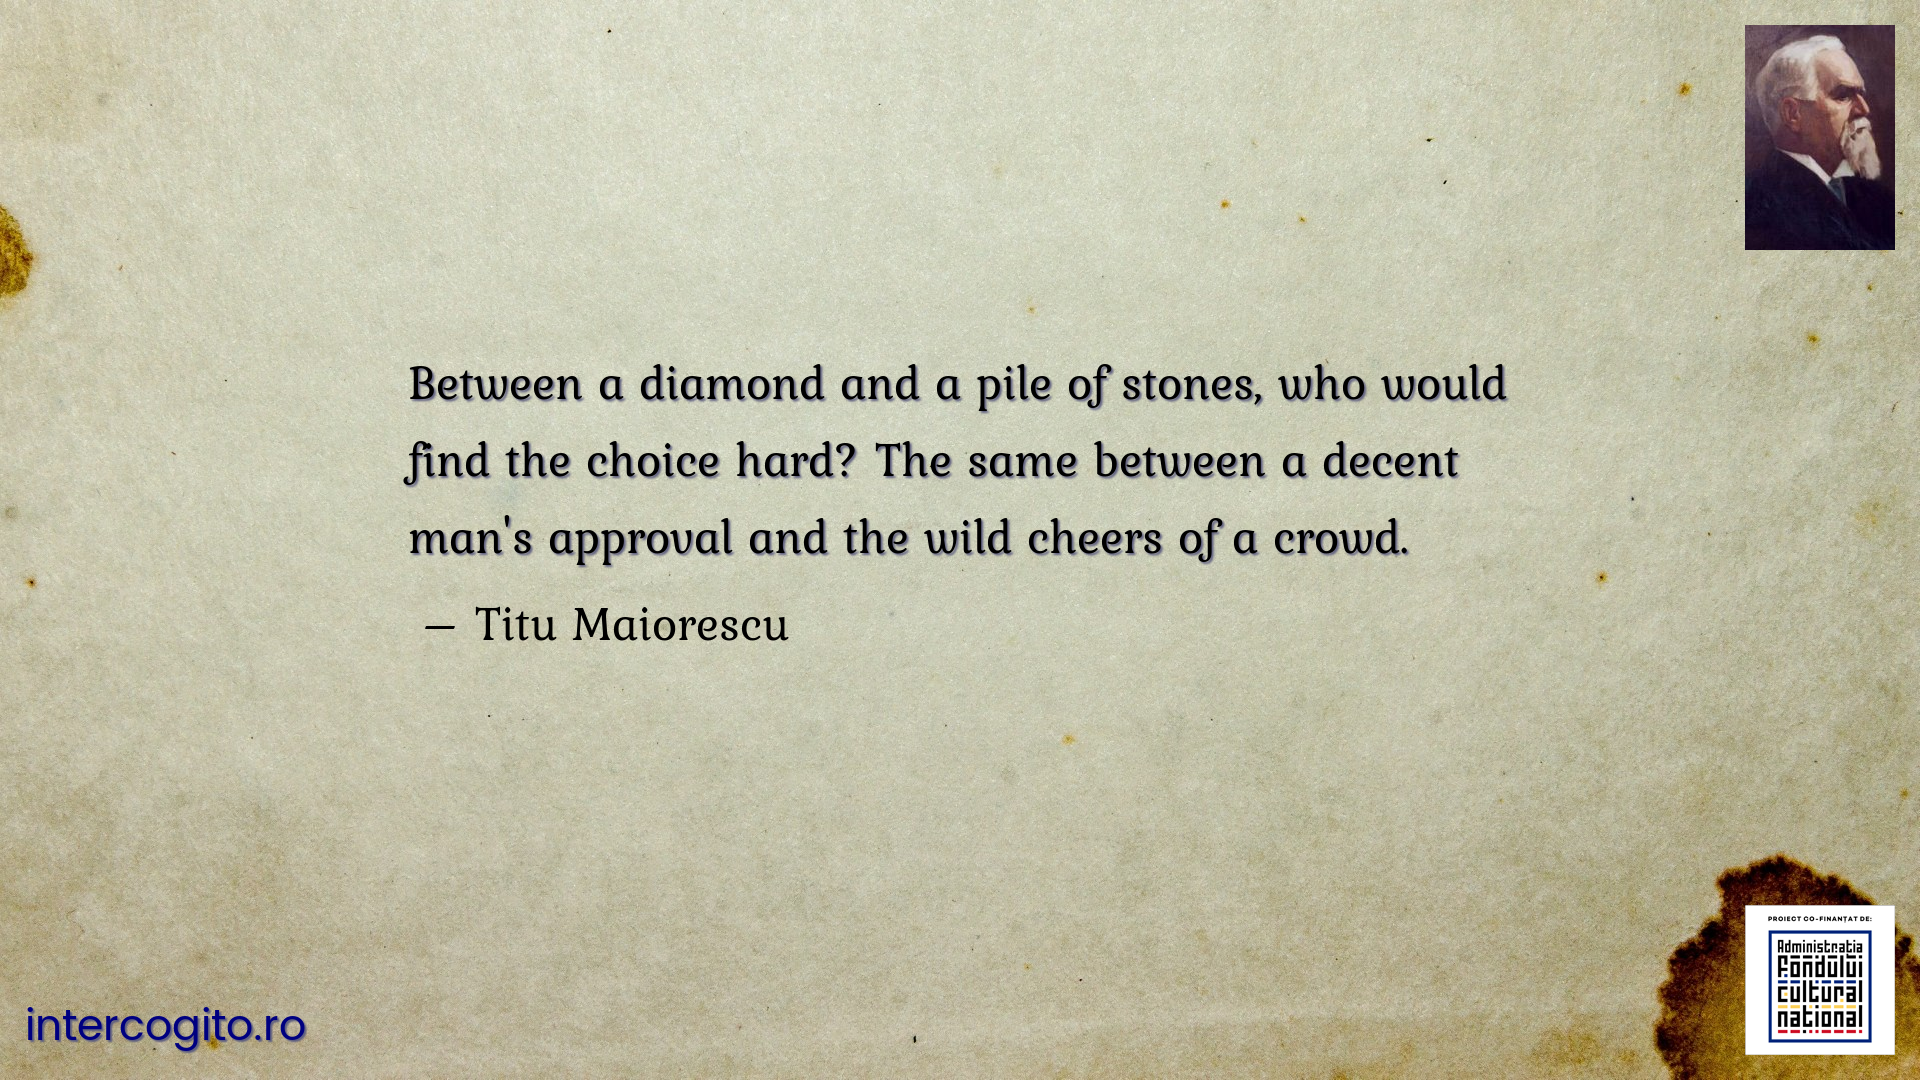 Between a diamond and a pile of stones, who would find the choice hard? The same between a decent man's approval and the wild cheers of a crowd.